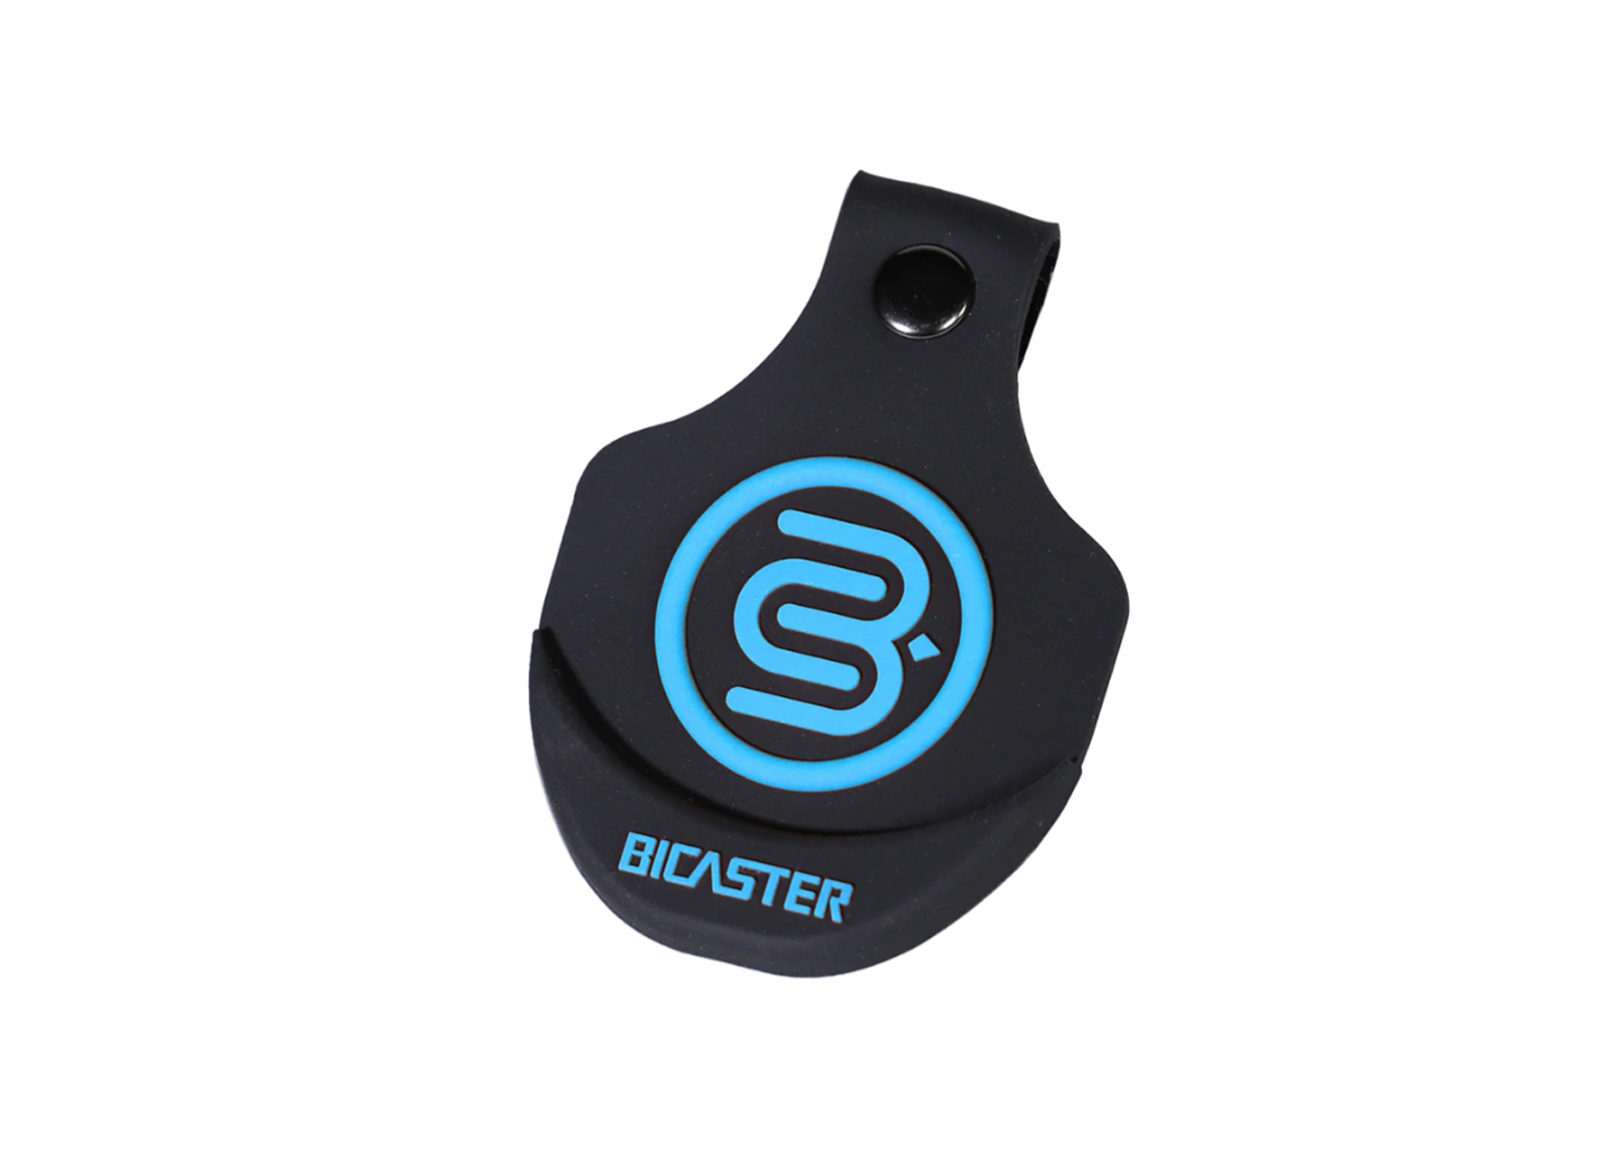 BICASTER LIMB PROTECTOR SHOES RUBBER PAD